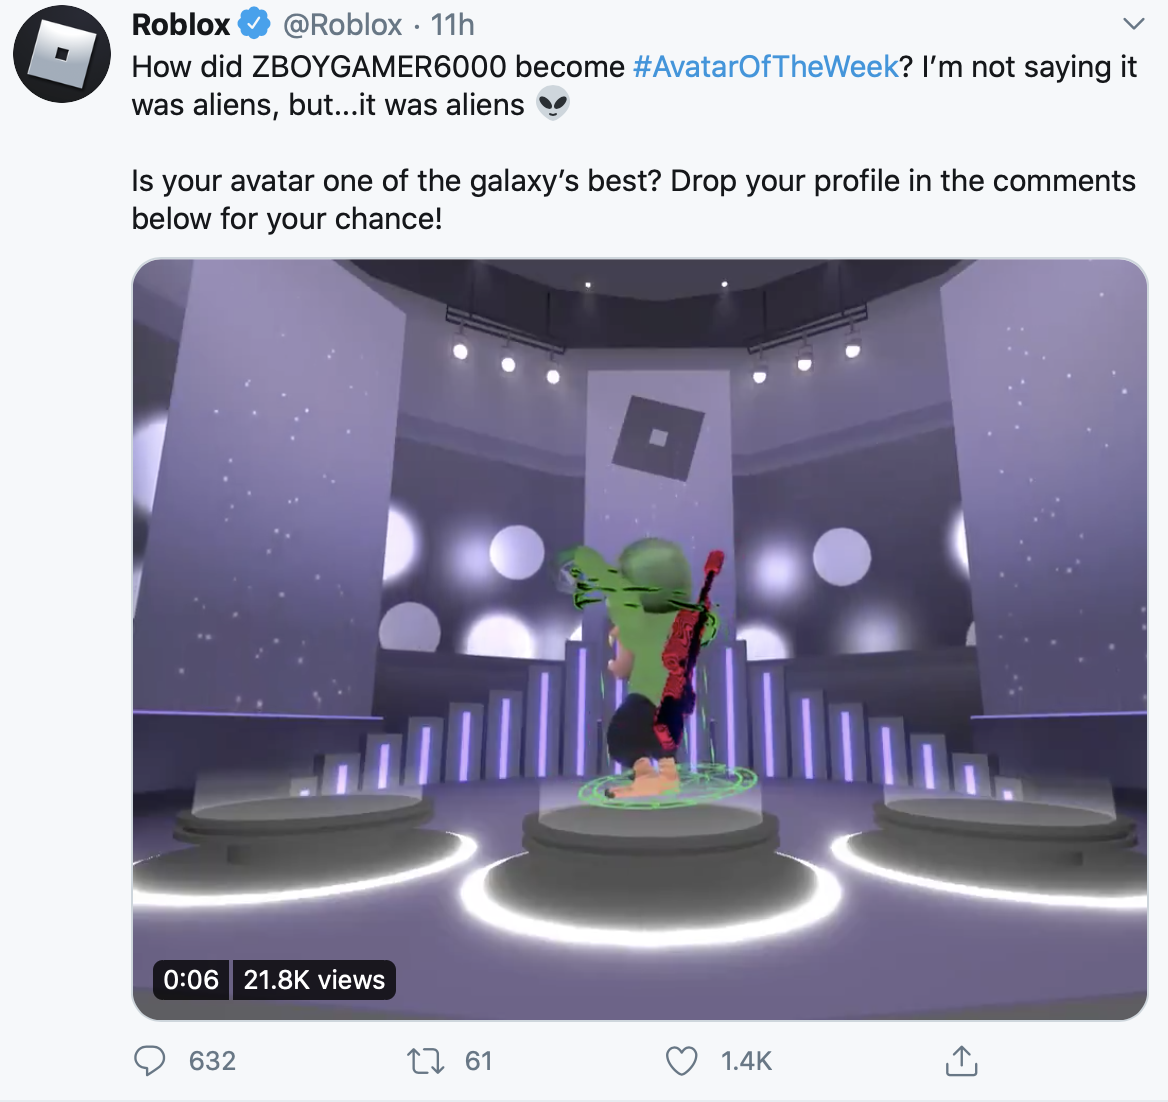 Gleaming Charm Roblox Loomianlegacyfanart Instagram Posts Gramho Com - data of top roblox games and concurrent players album on imgur